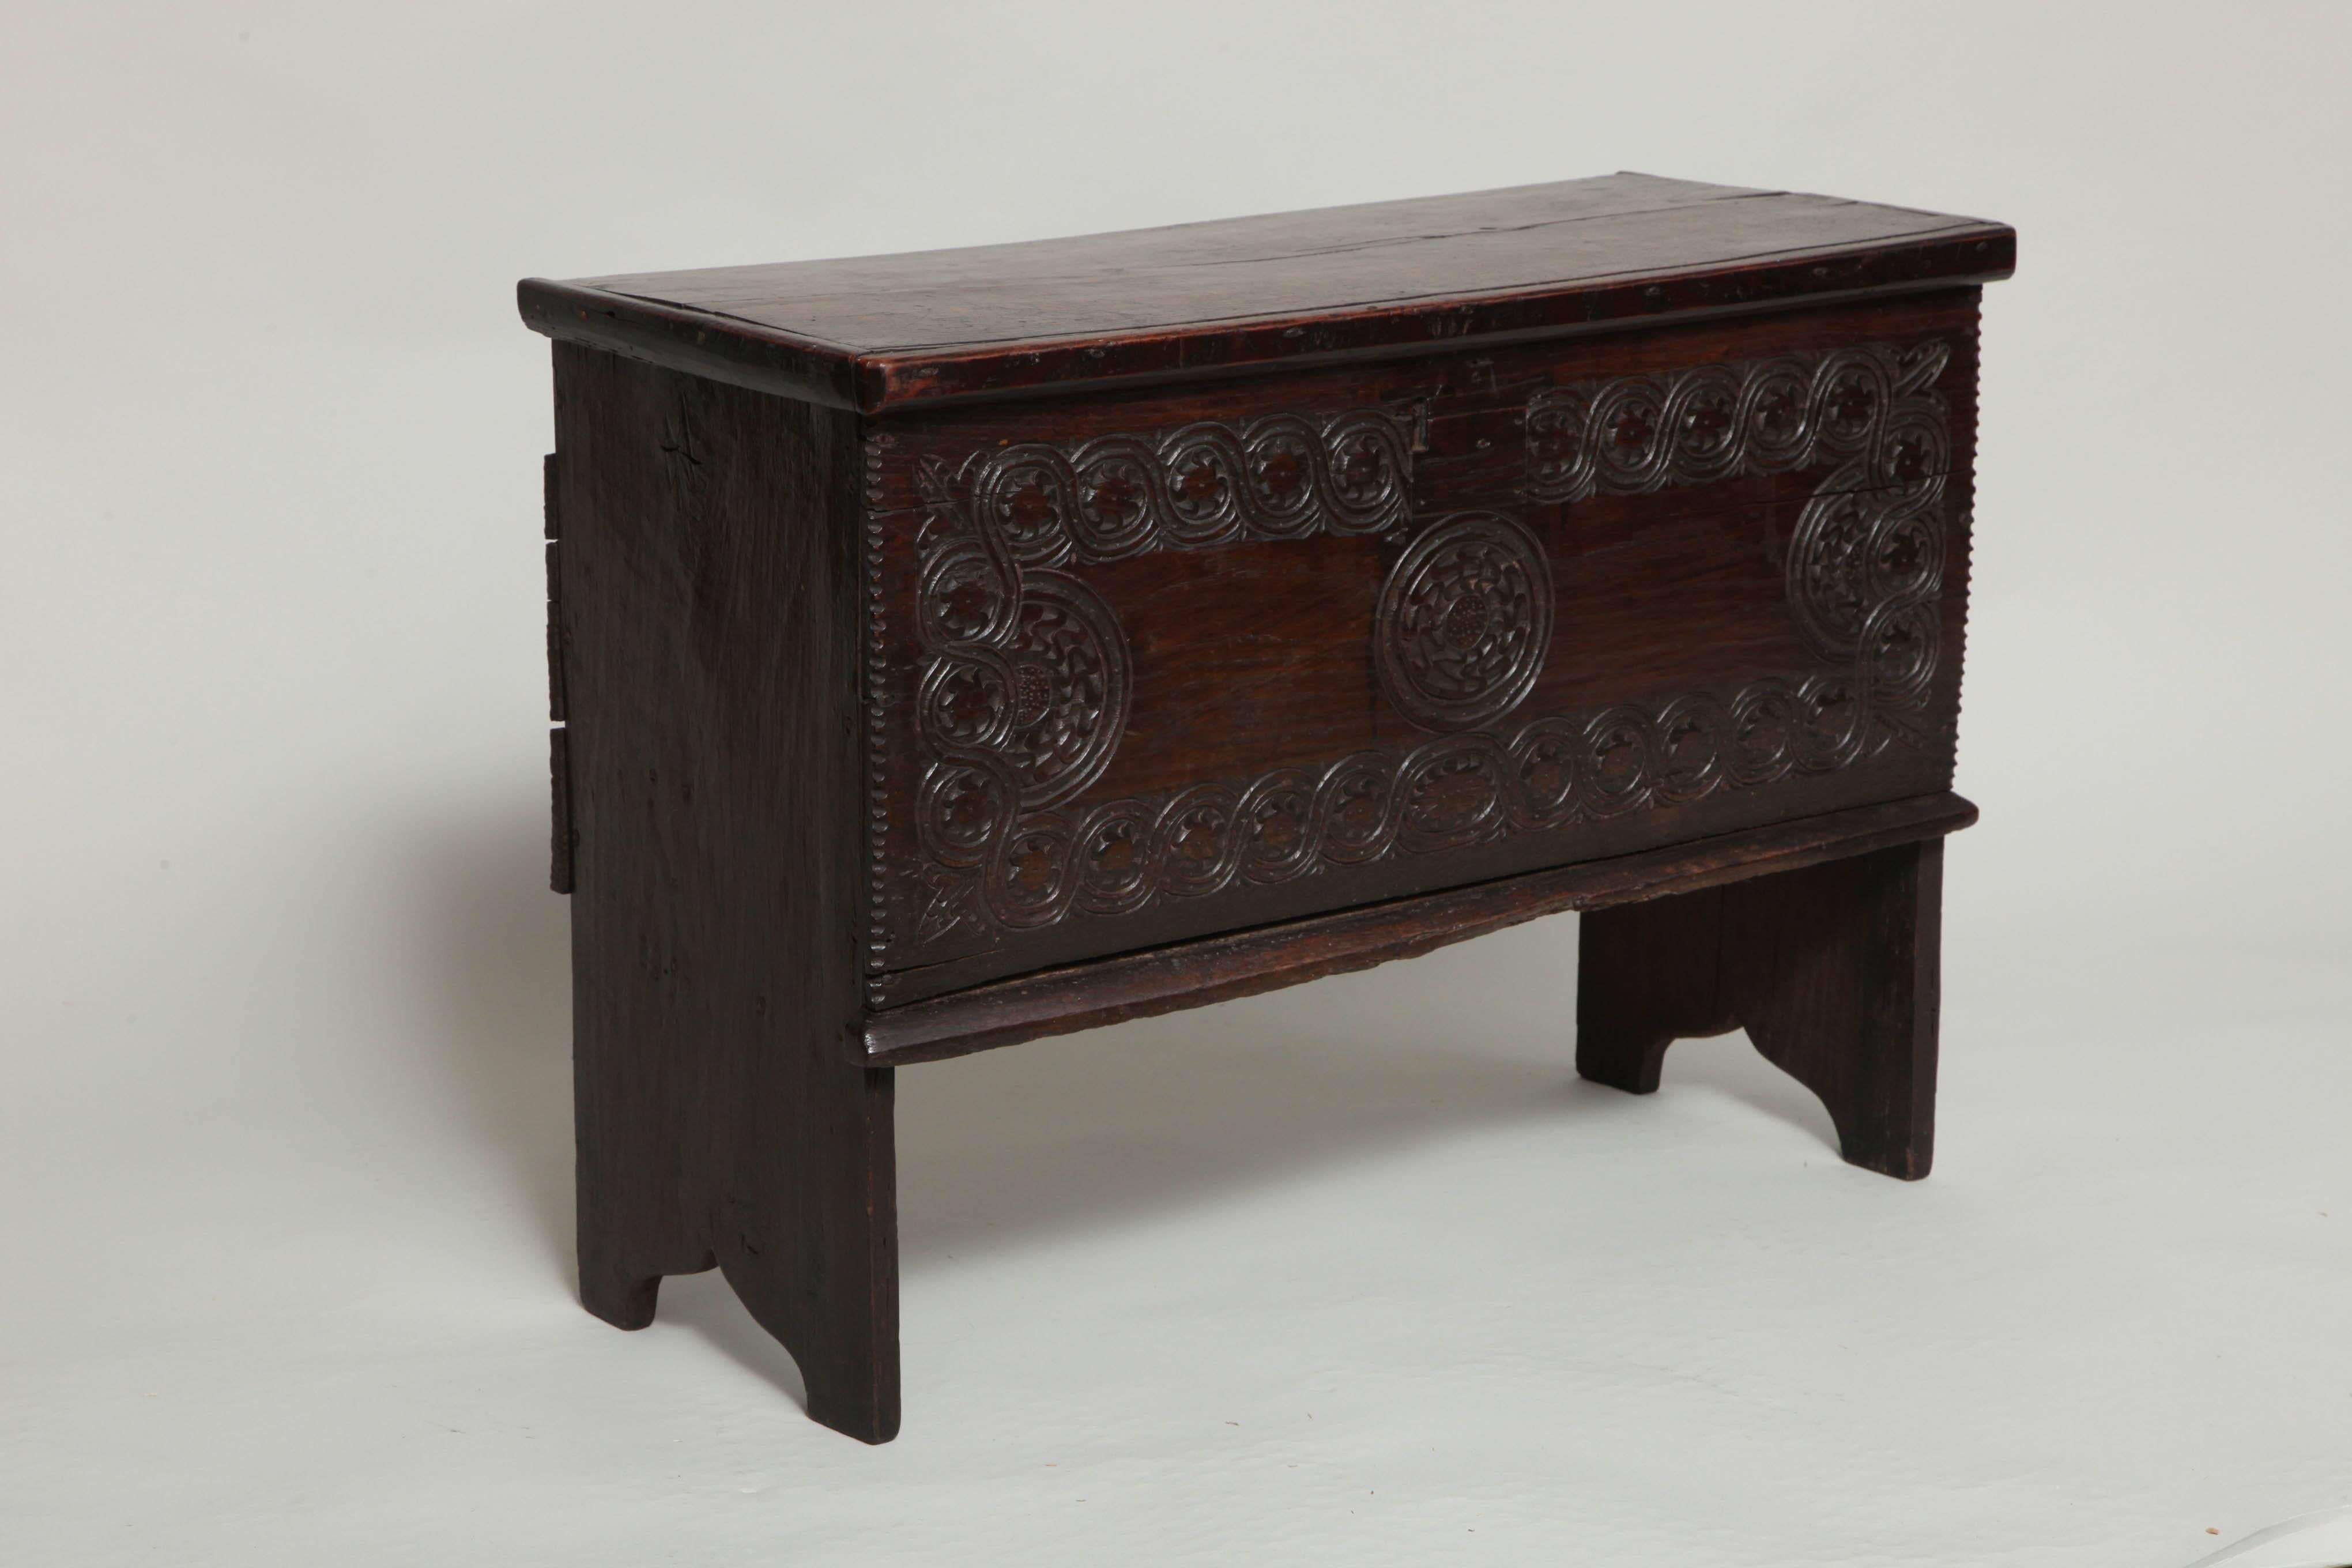 Fine mid-17th century diminutive six plank coffer having a single plank top with molded edge, standing on boot jack feet, the front with fine geometric chip carving, the whole with good, rich color.  Useful scale.  English, circa 1650.